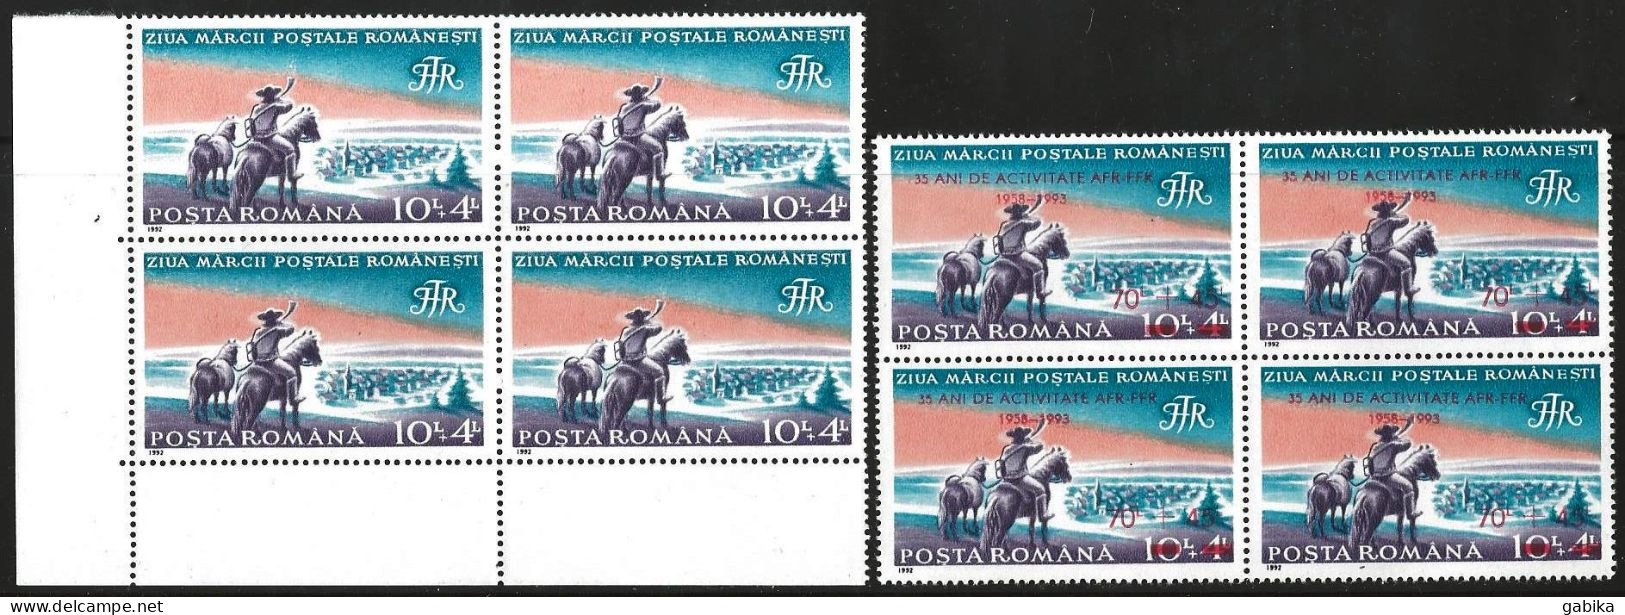 Romania 1992 1993, Scott B458 B460, MNH, Block Of Four, Without And With Overprint, Stamp Day AFR - Neufs